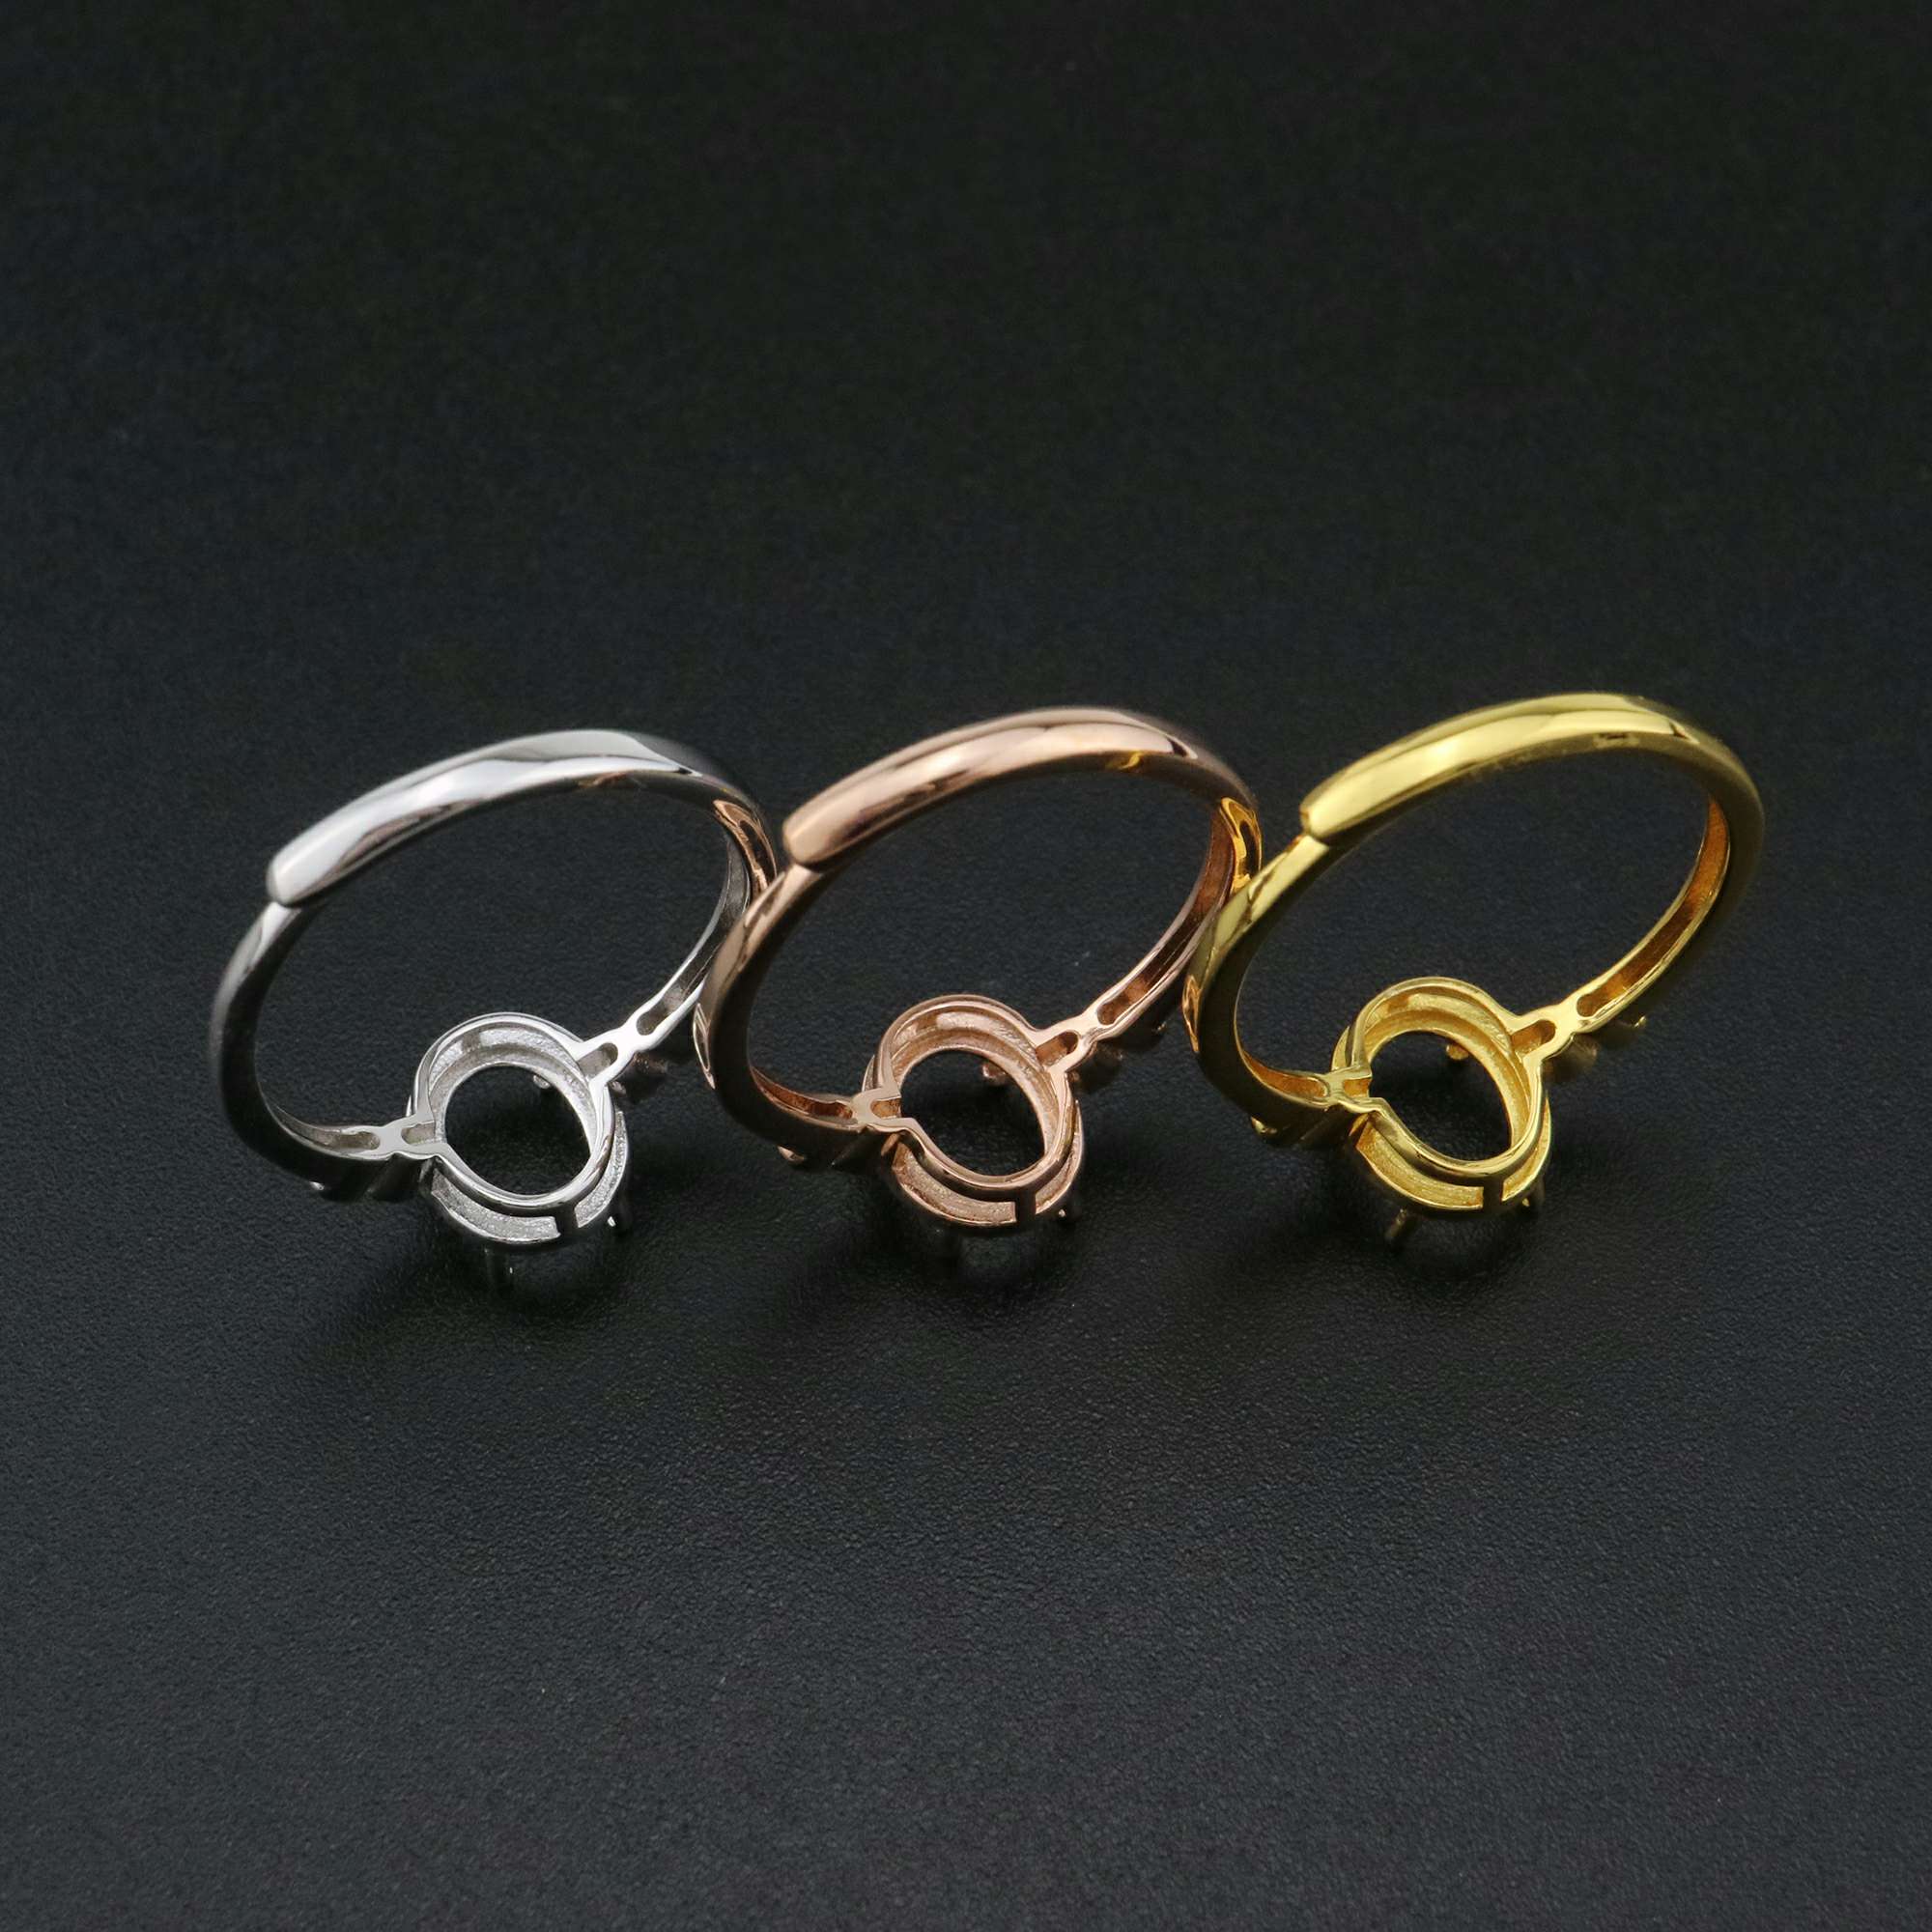 1Pcs 6x8MM Oval Prong Ring Settings Adjustable Vinatge Style Gold Plated Solid 925 Sterling Silver Bezel Tray for Gemstone 1224049 - Click Image to Close